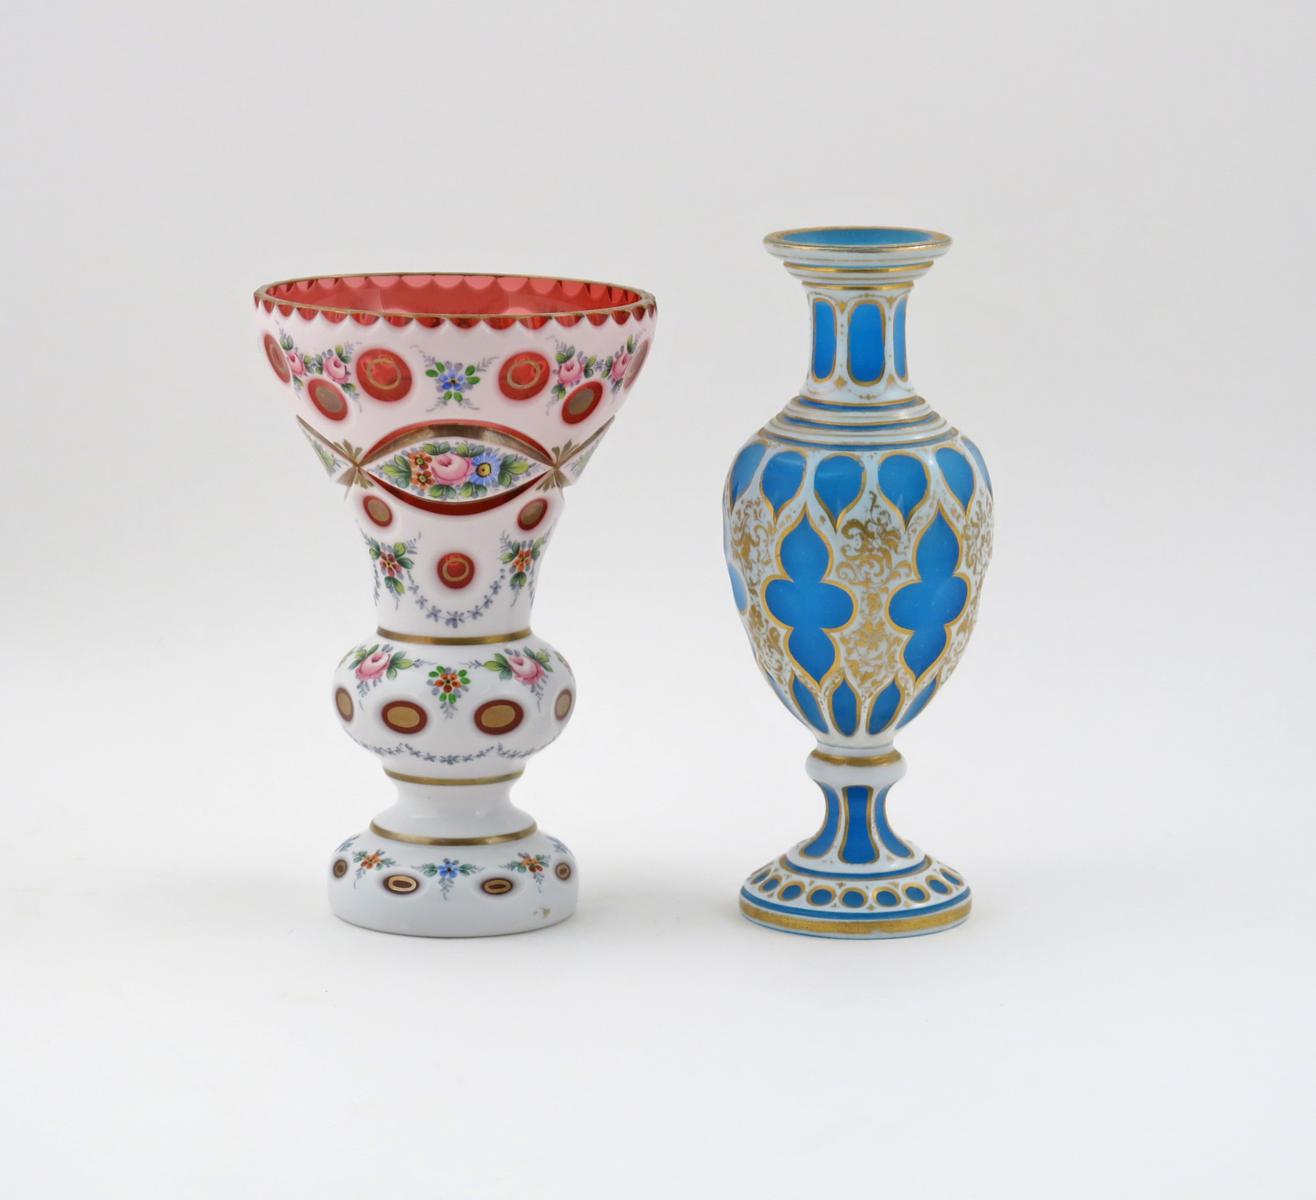 Two Bohemian glass vases, 19th century, one cranberry and overlaid in white, cut with a circular